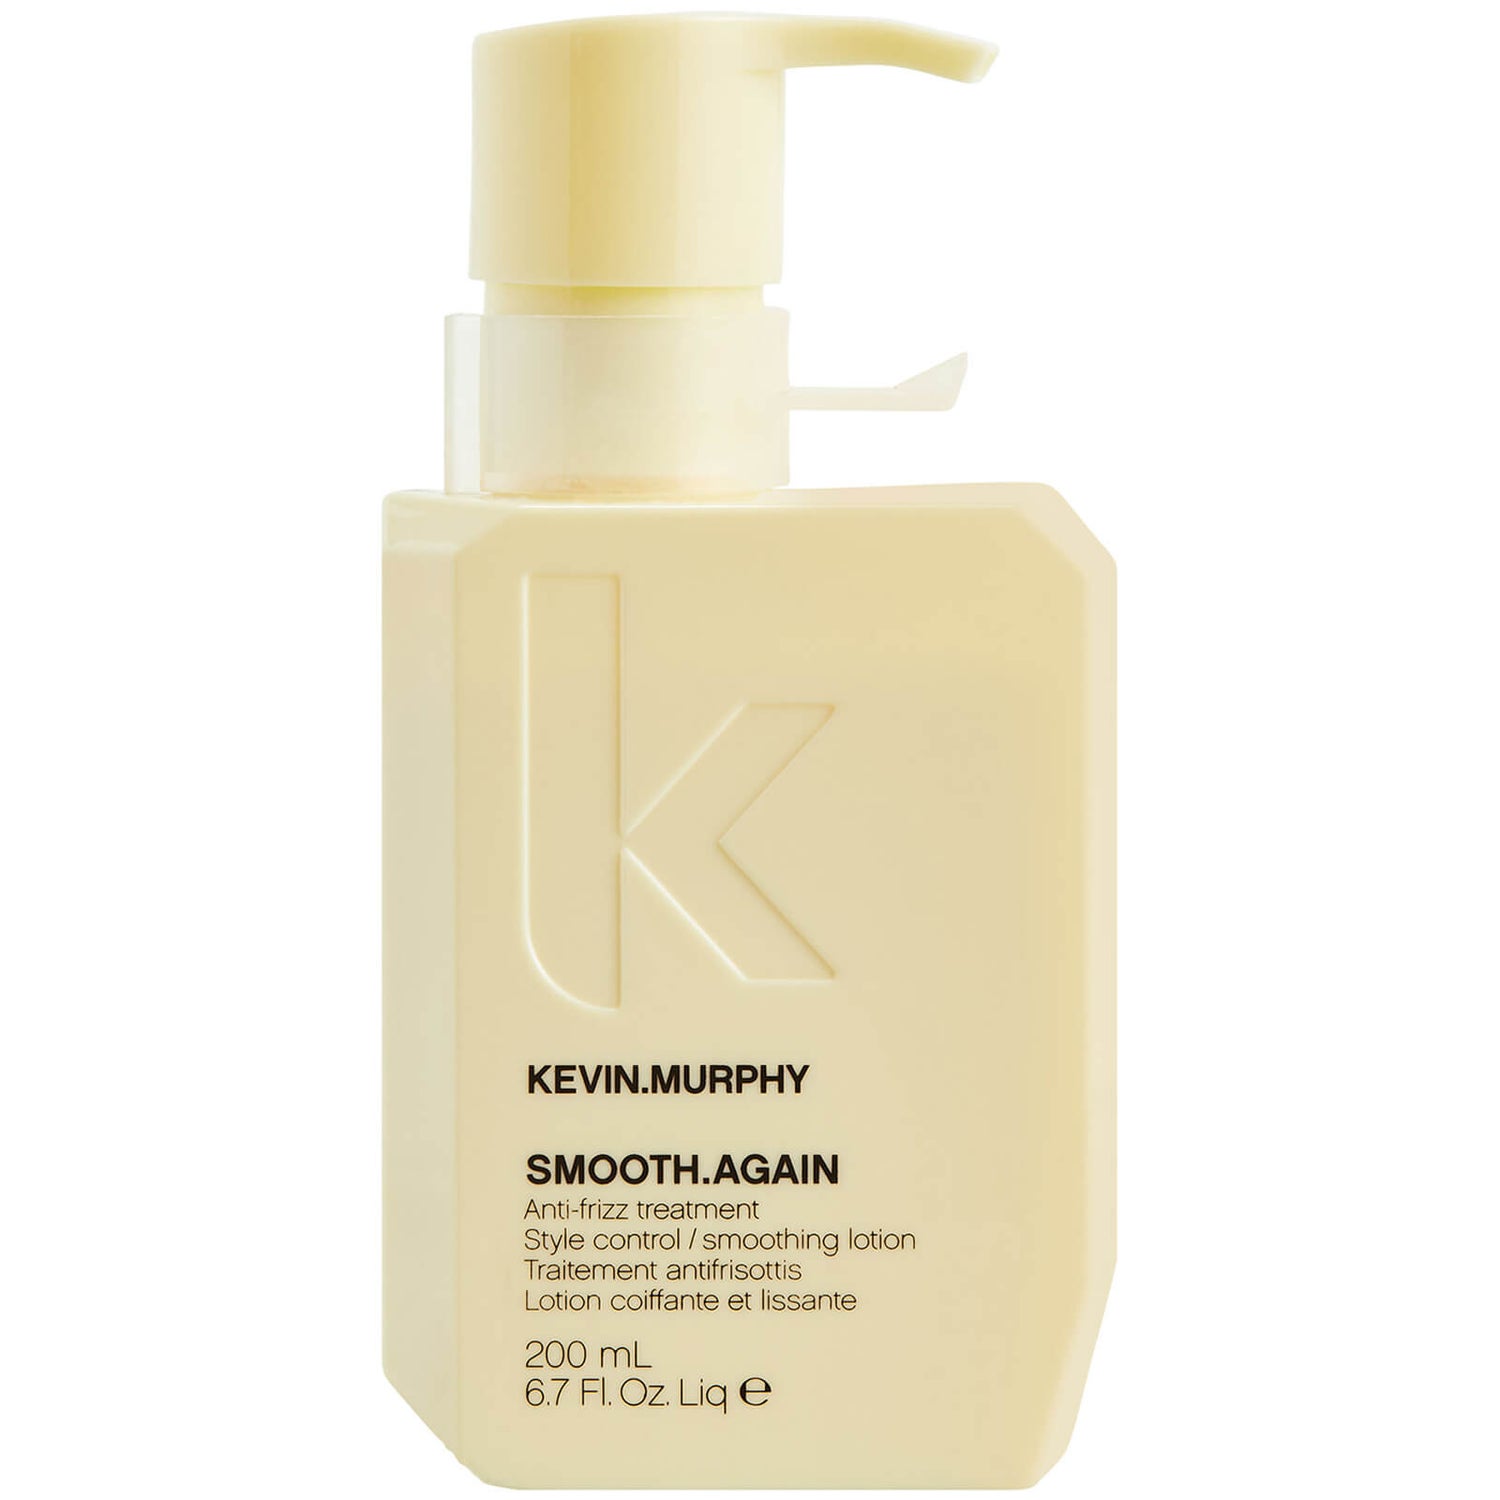 KEVIN MURPHY Smooth.Again 200ml